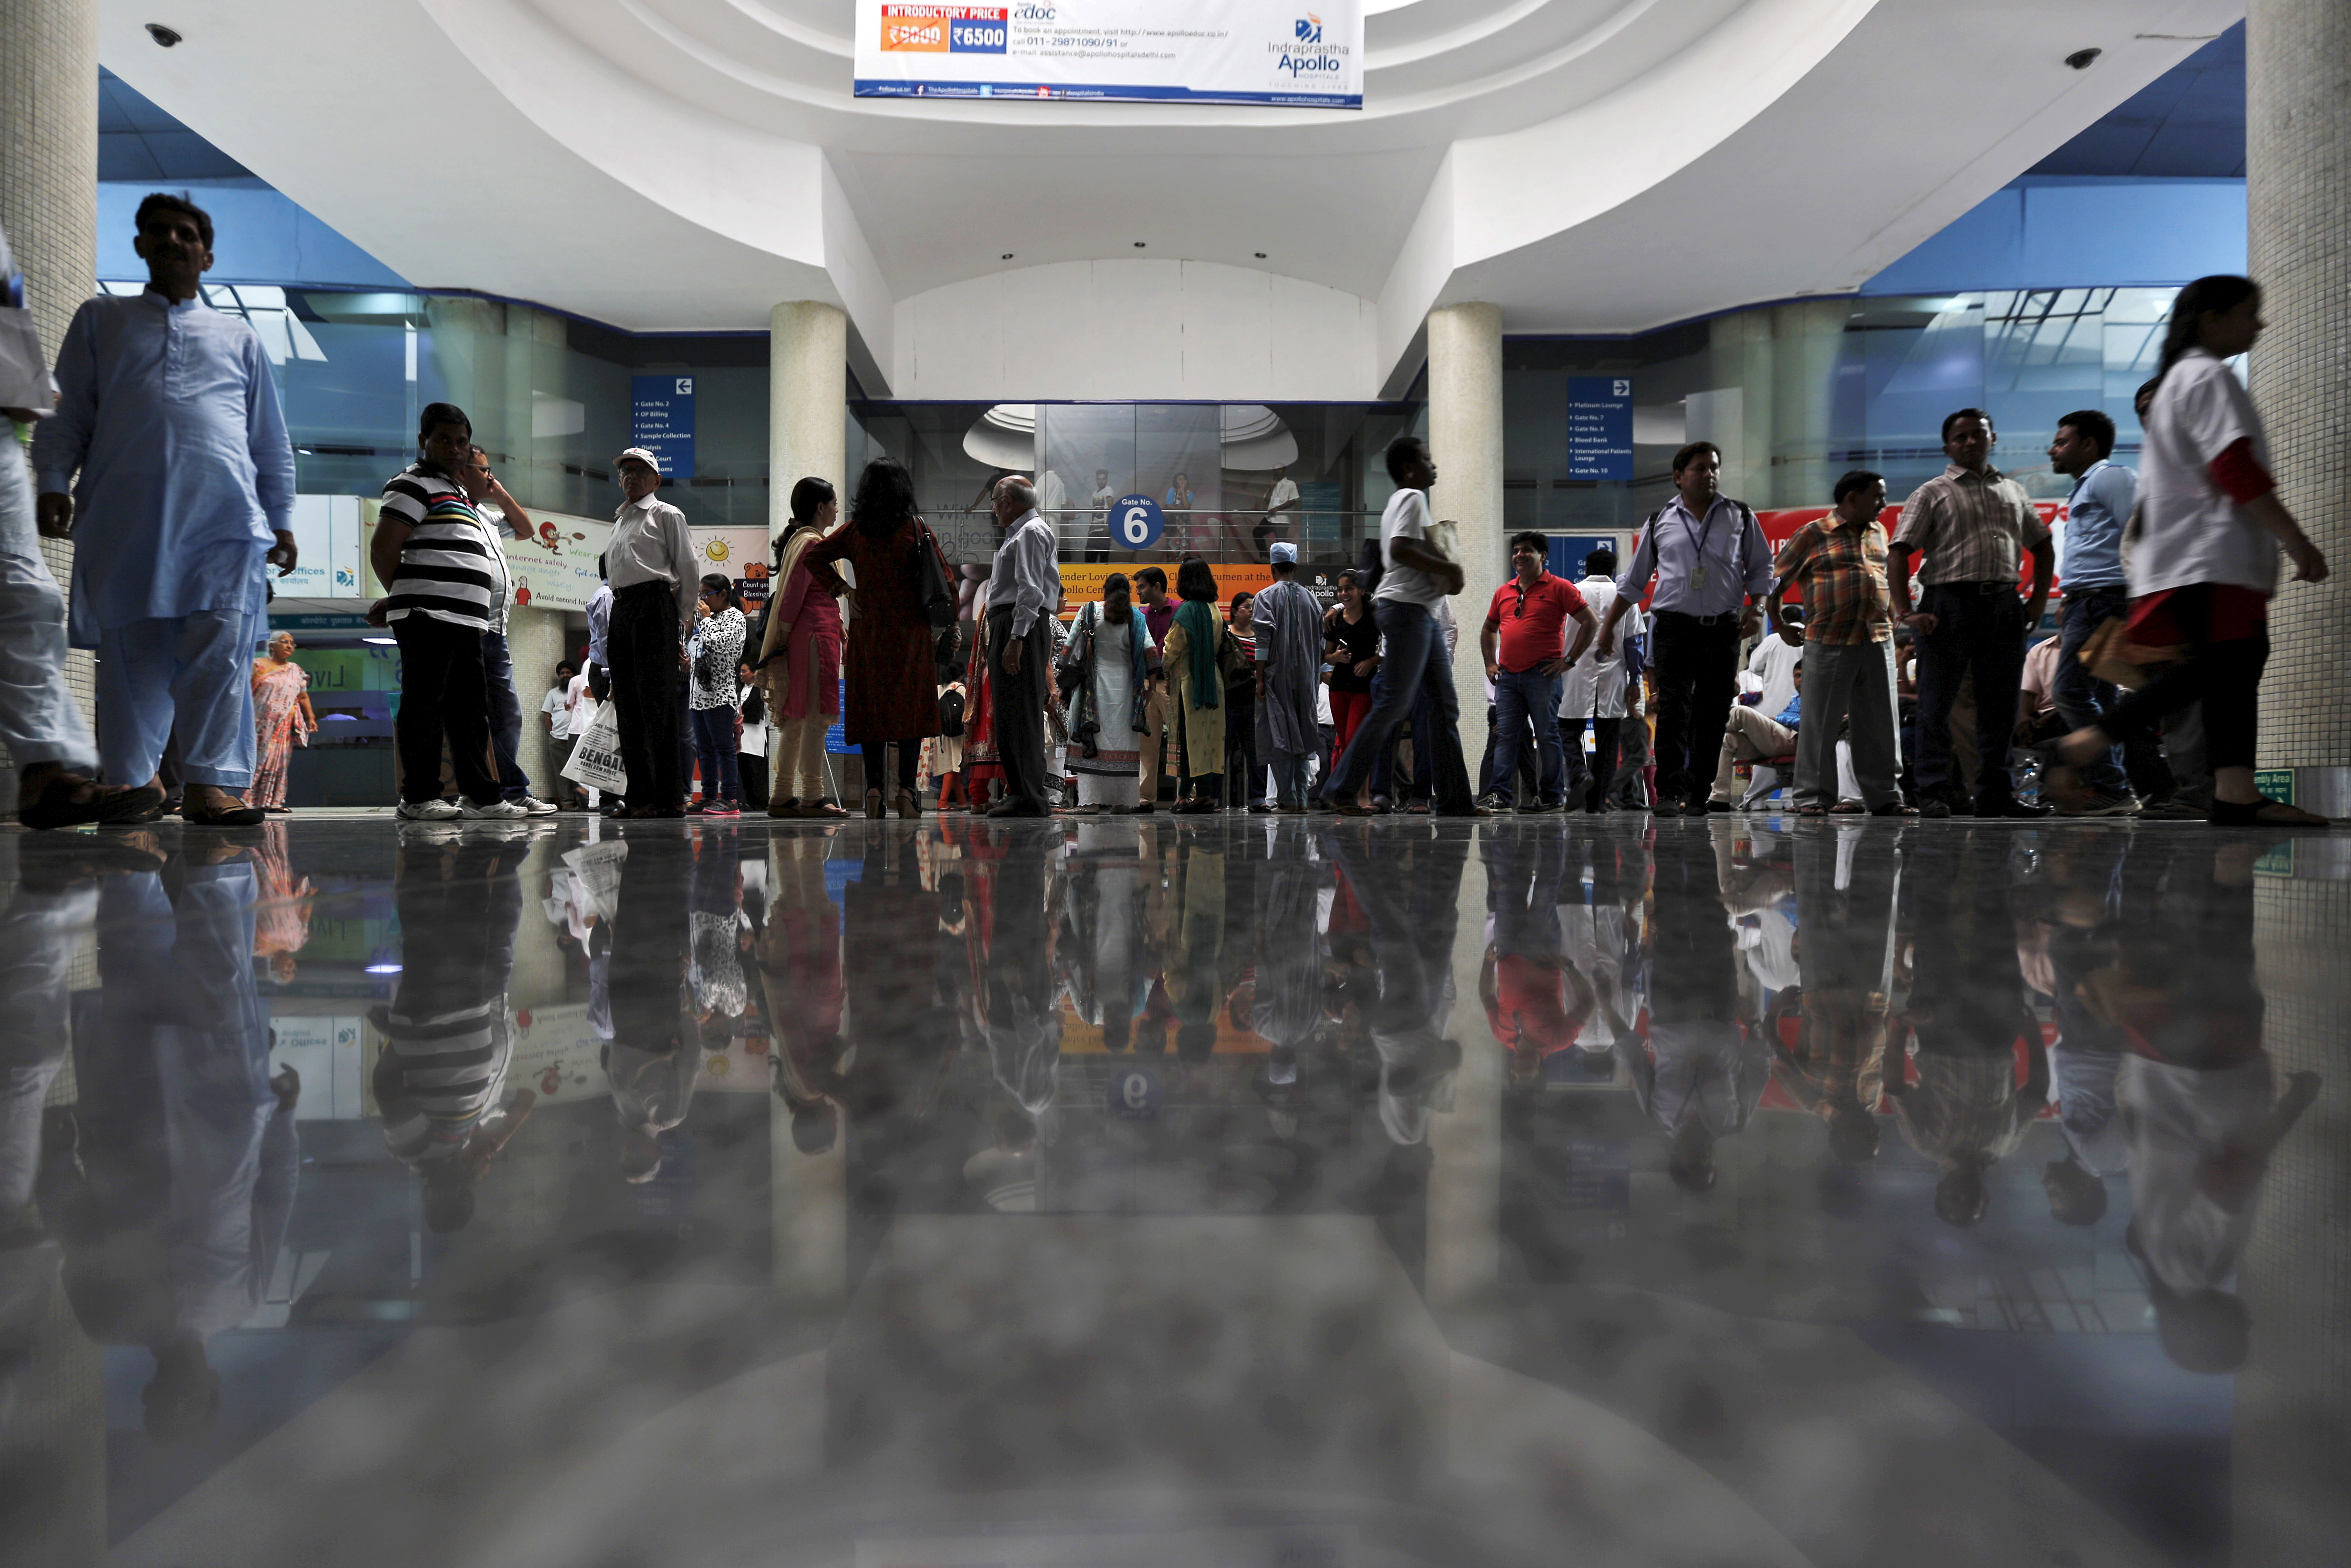 Patients and their attendants are seen inside Apollo hospital in New Delhi